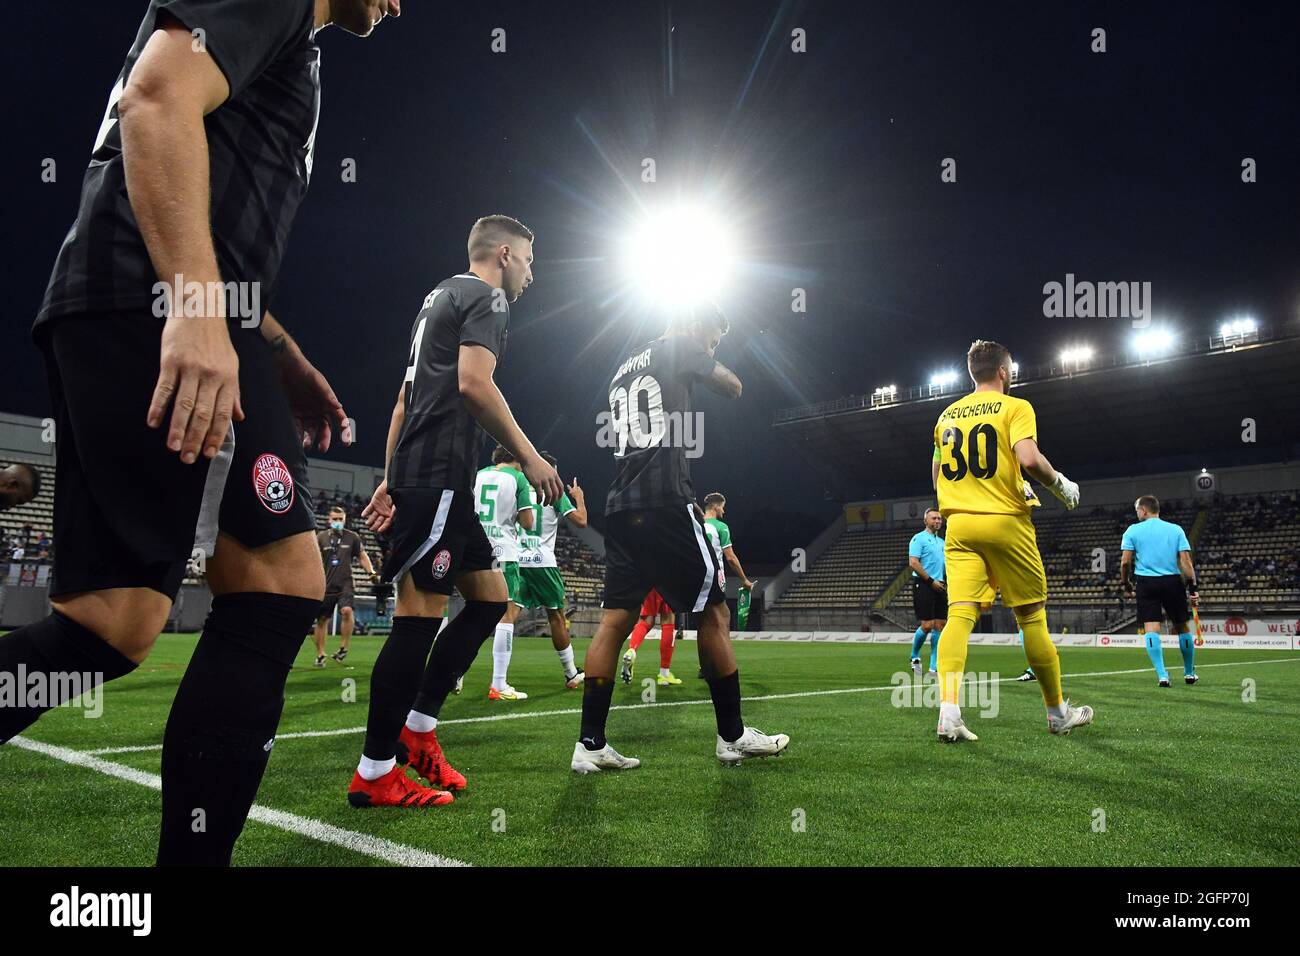 ZAPORIZHZHIA, UKRAINE - AUGUST 26, 2021 - Players of FC Zorya Luhansk emerge from the tunnel before the 2021/2022 UEFA Europa League play-off 2nd leg game against SK Rapid Wien at the Slavutych Arena, Zaporizhzhia, southeastern Ukraine. Stock Photo